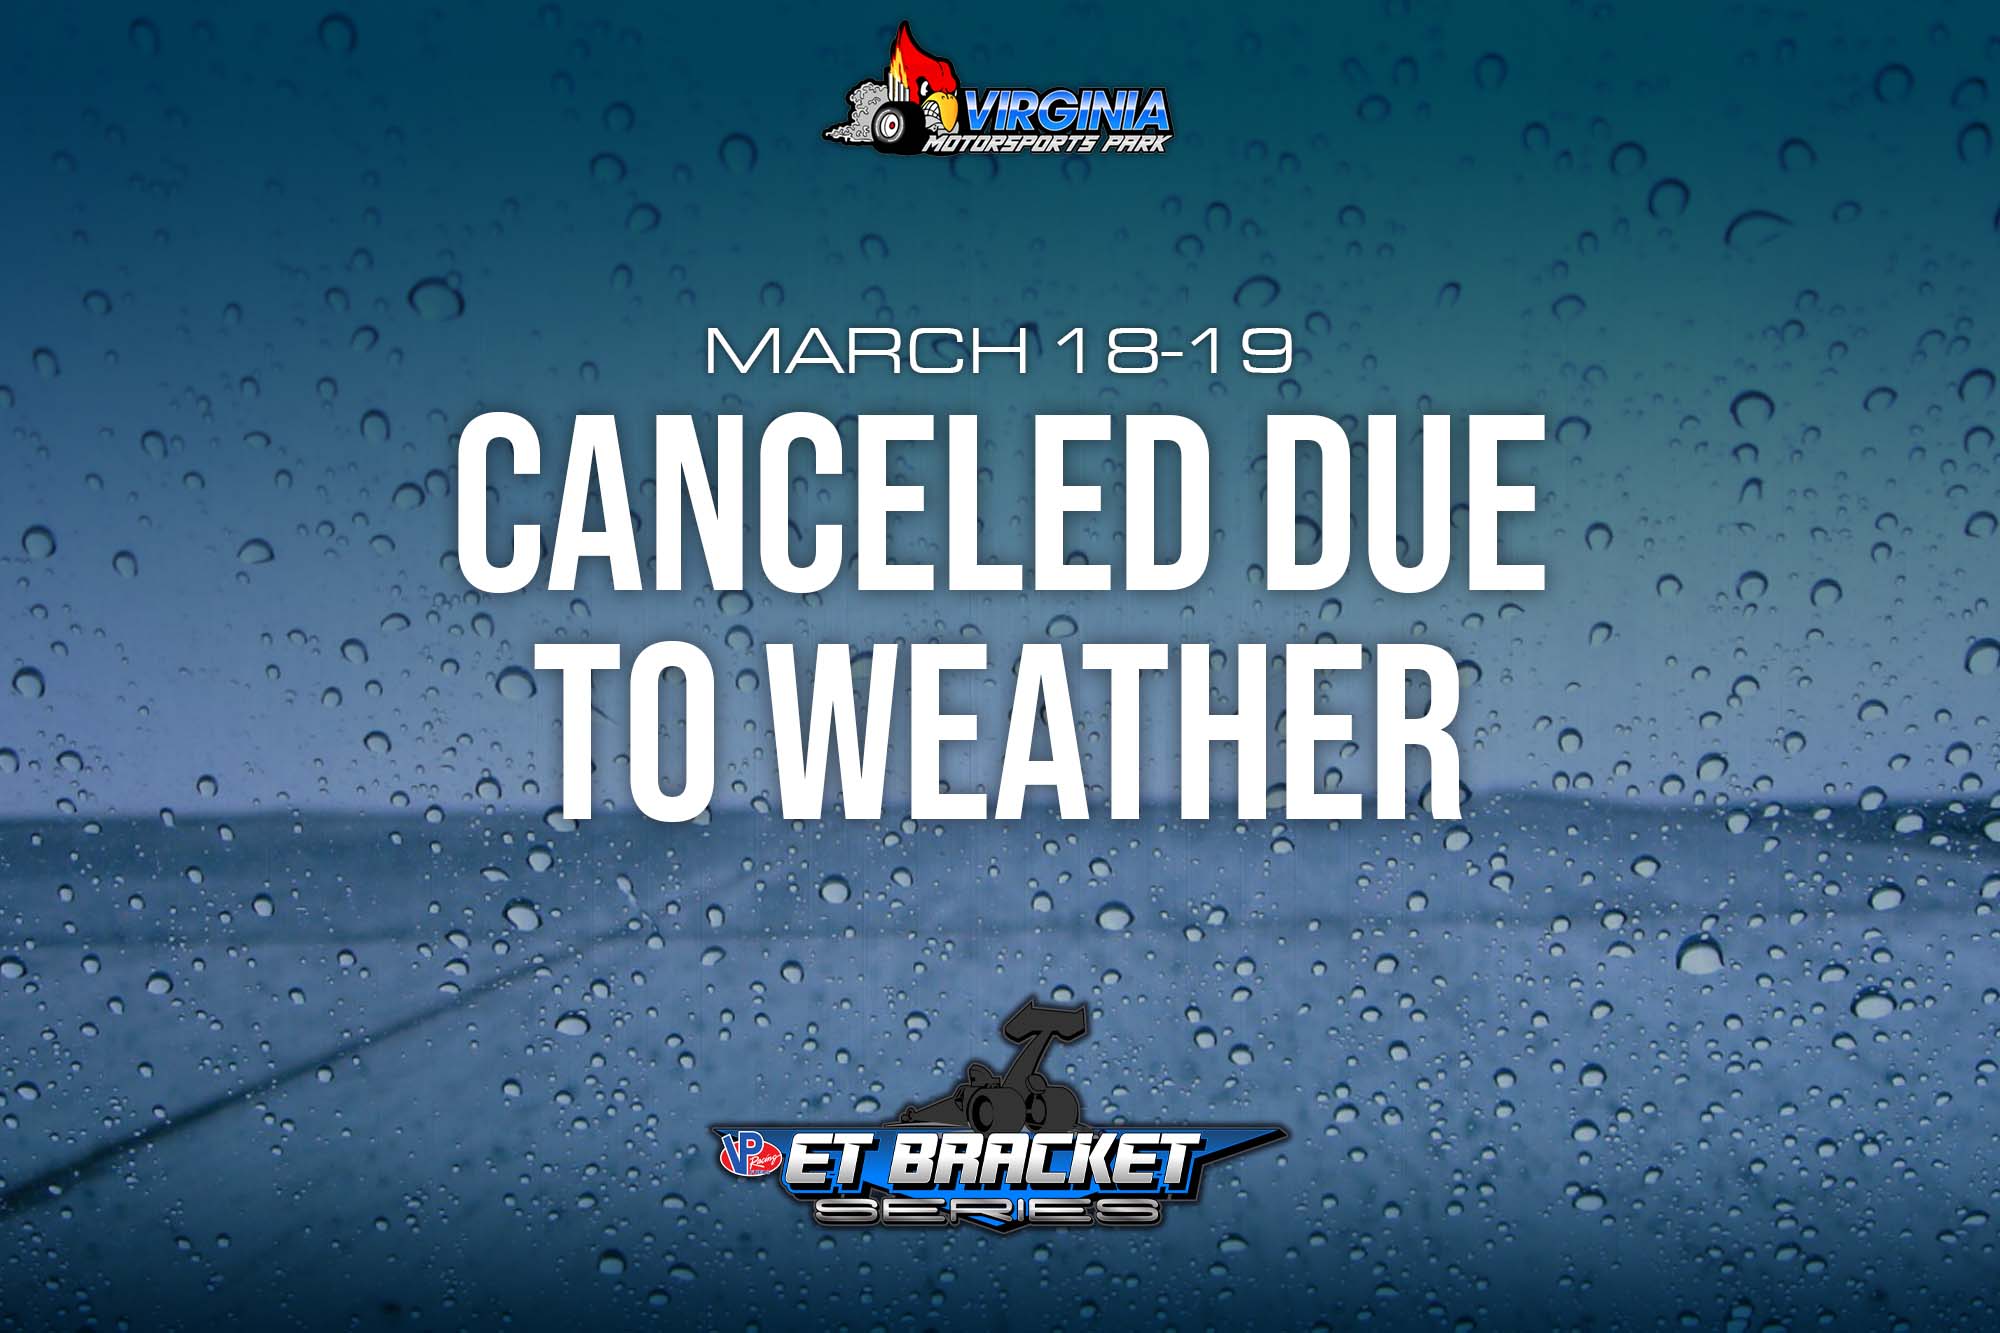 Canceled Due To Weather: VP ET Bracket Series (March 18-19)